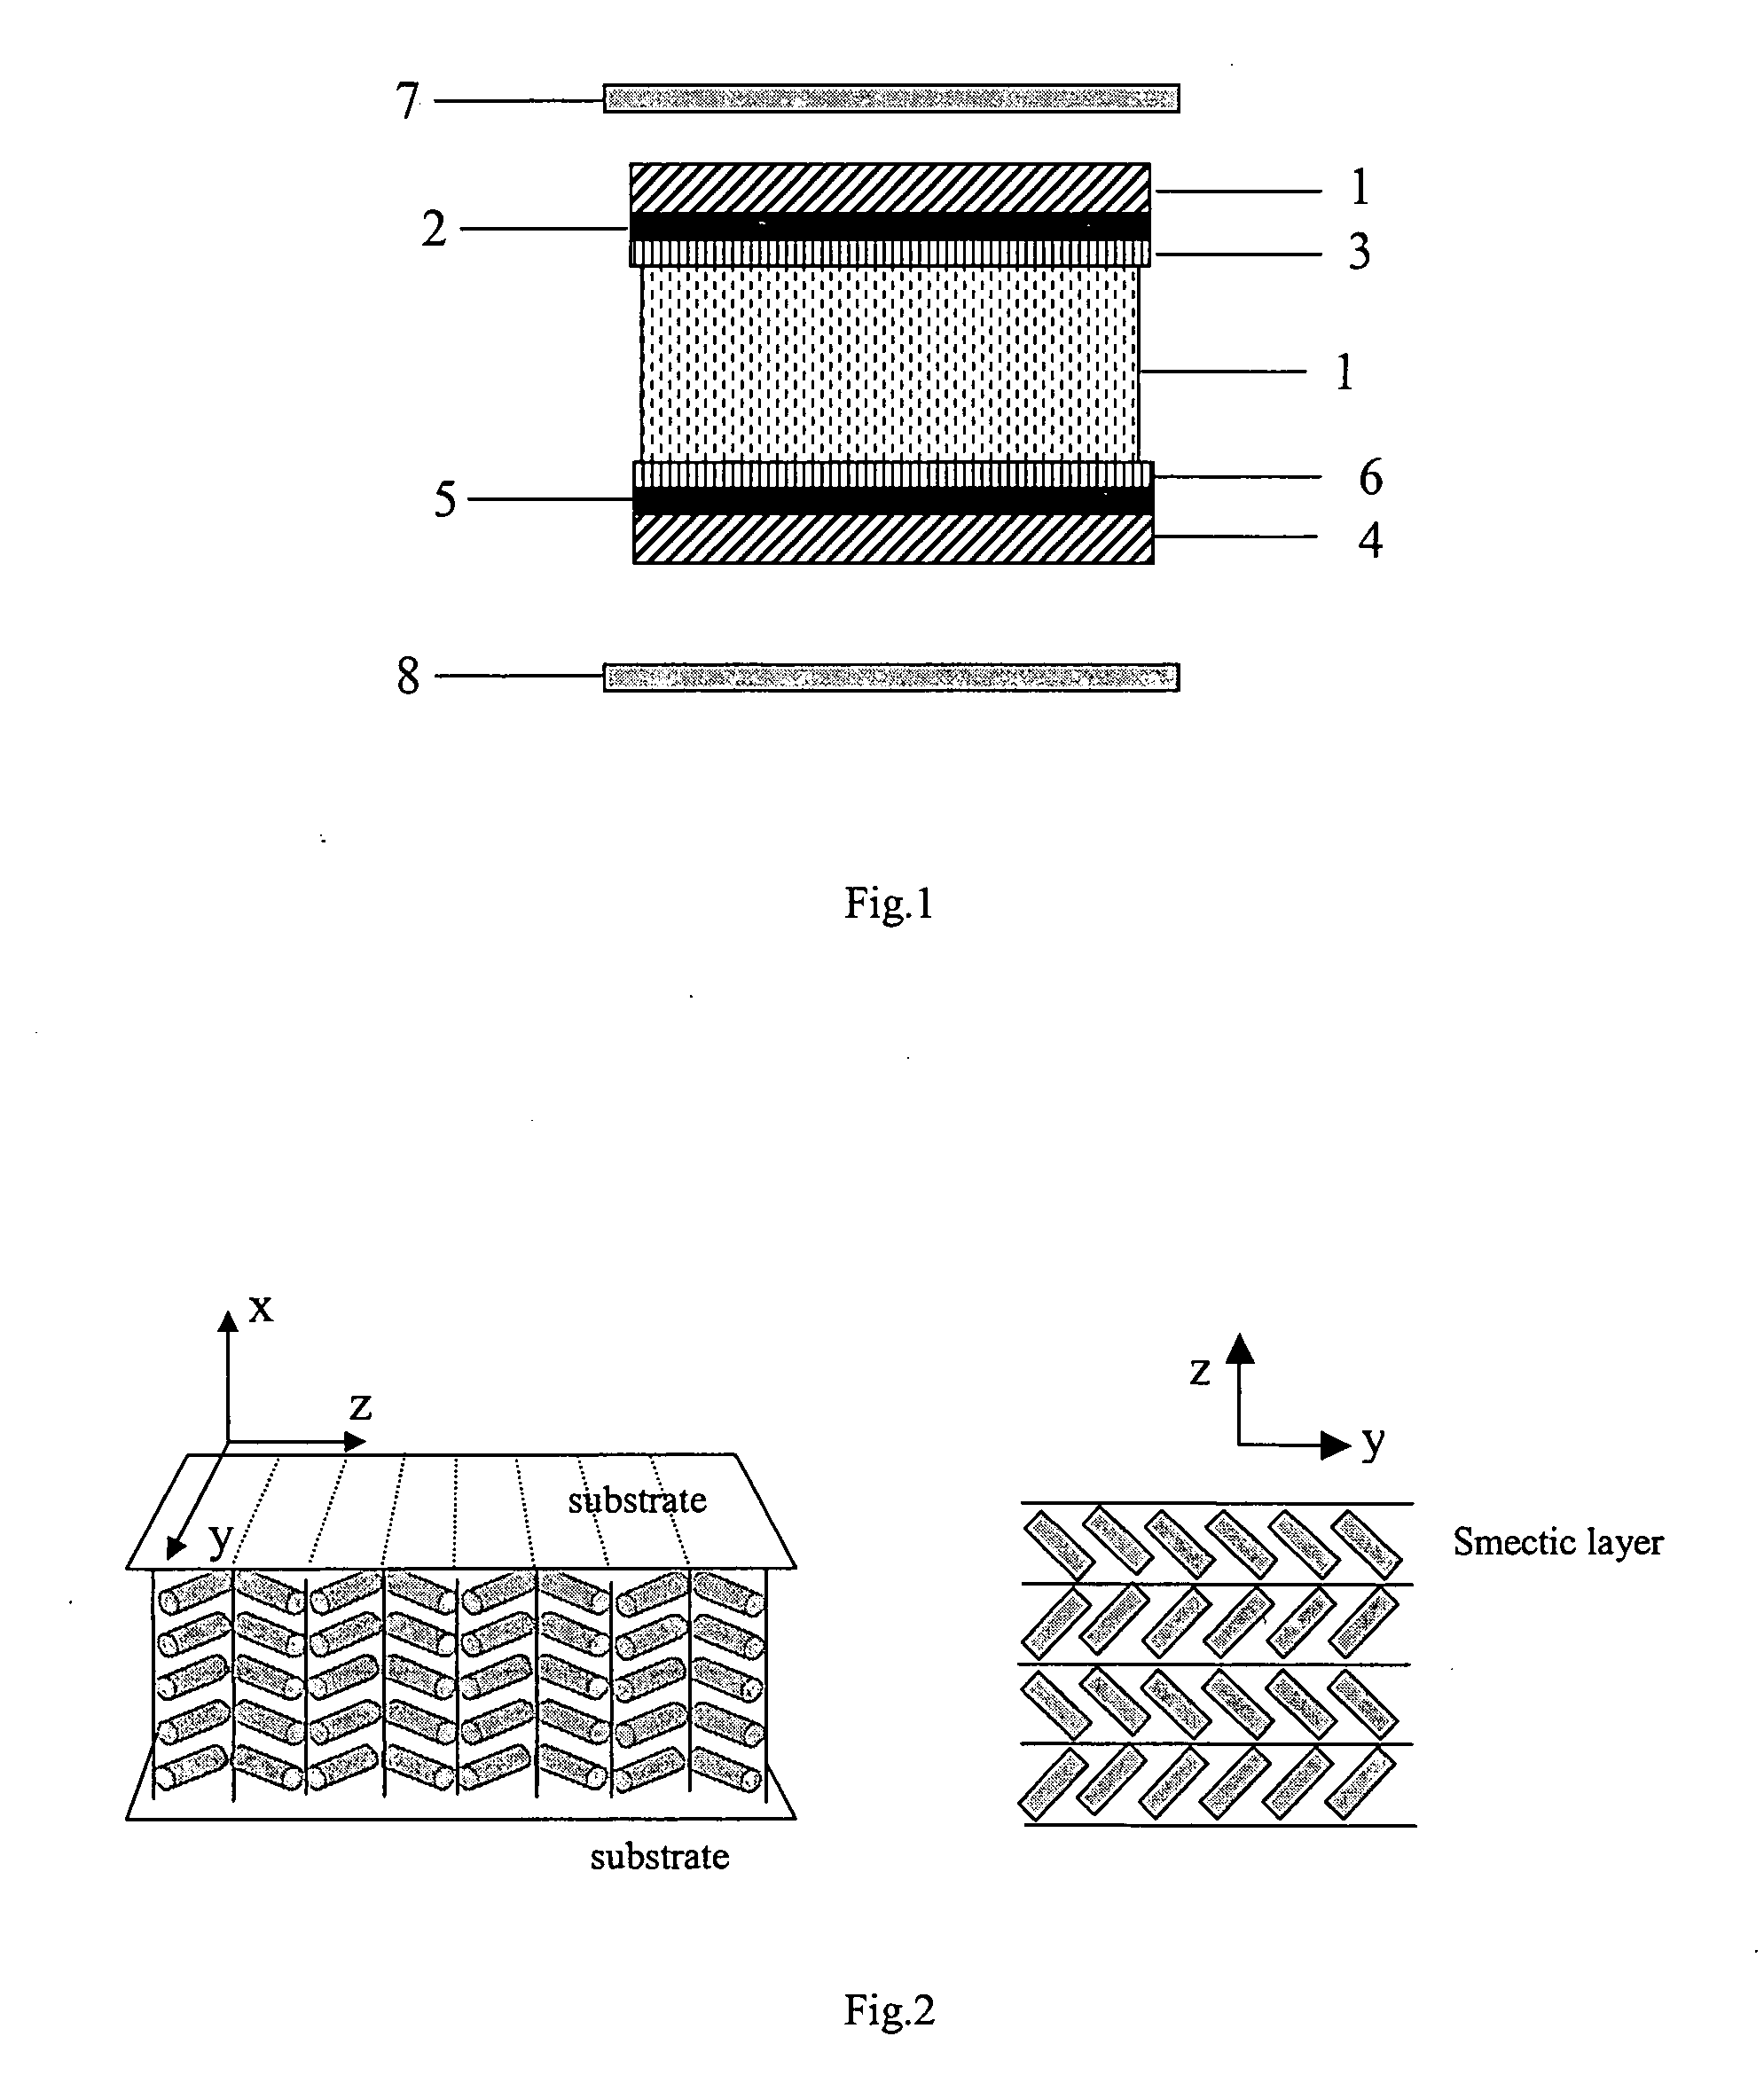 Liquid crystal device for generation and fast switching of high contrast images